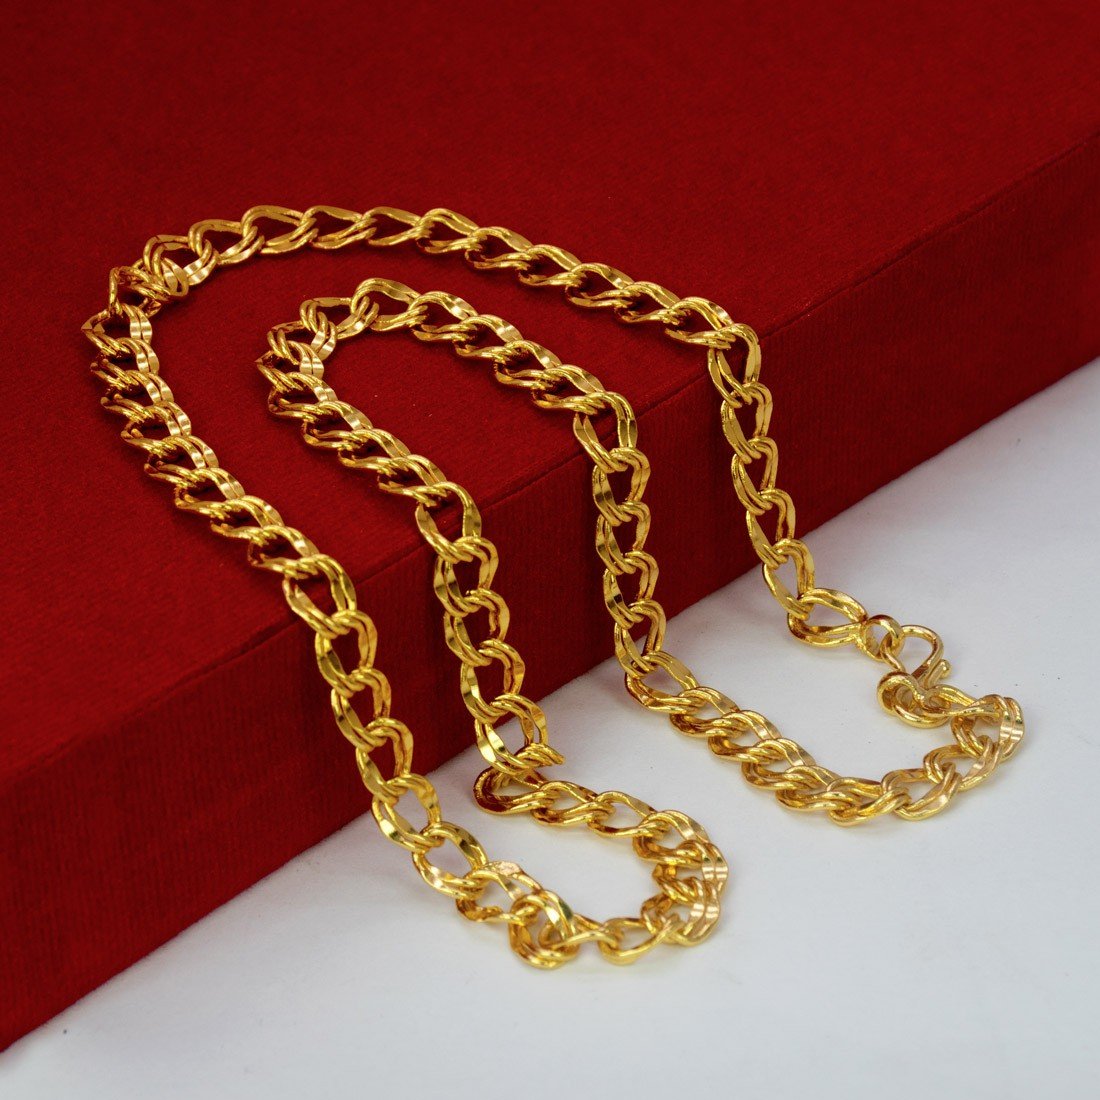 Glow silver gold plated necklace with double chain - Oxette